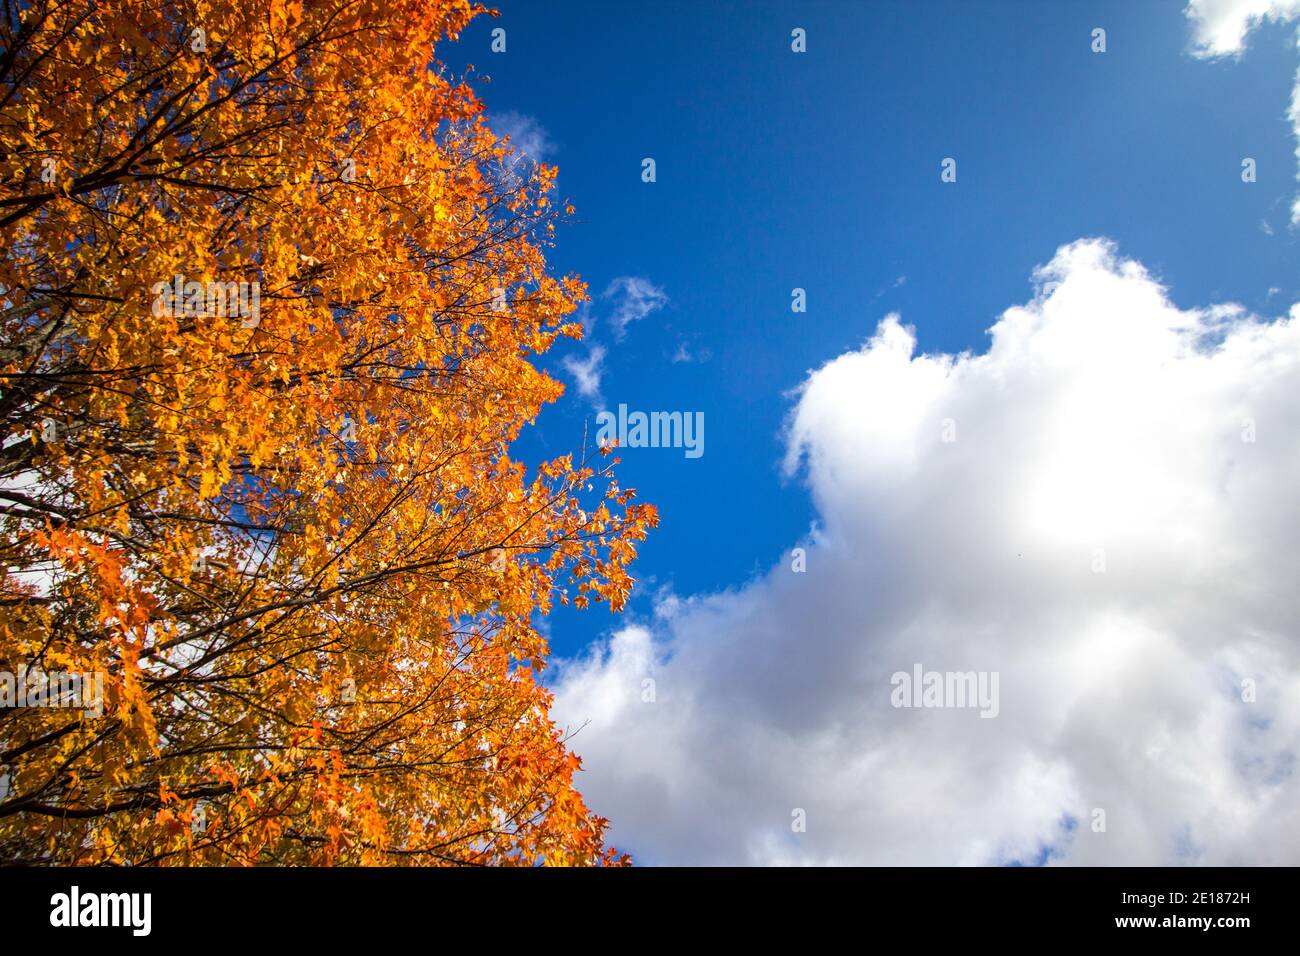 Autumn leaves in full fall foliage set against a sunny blue sky landscapes with copy space. Stock Photo